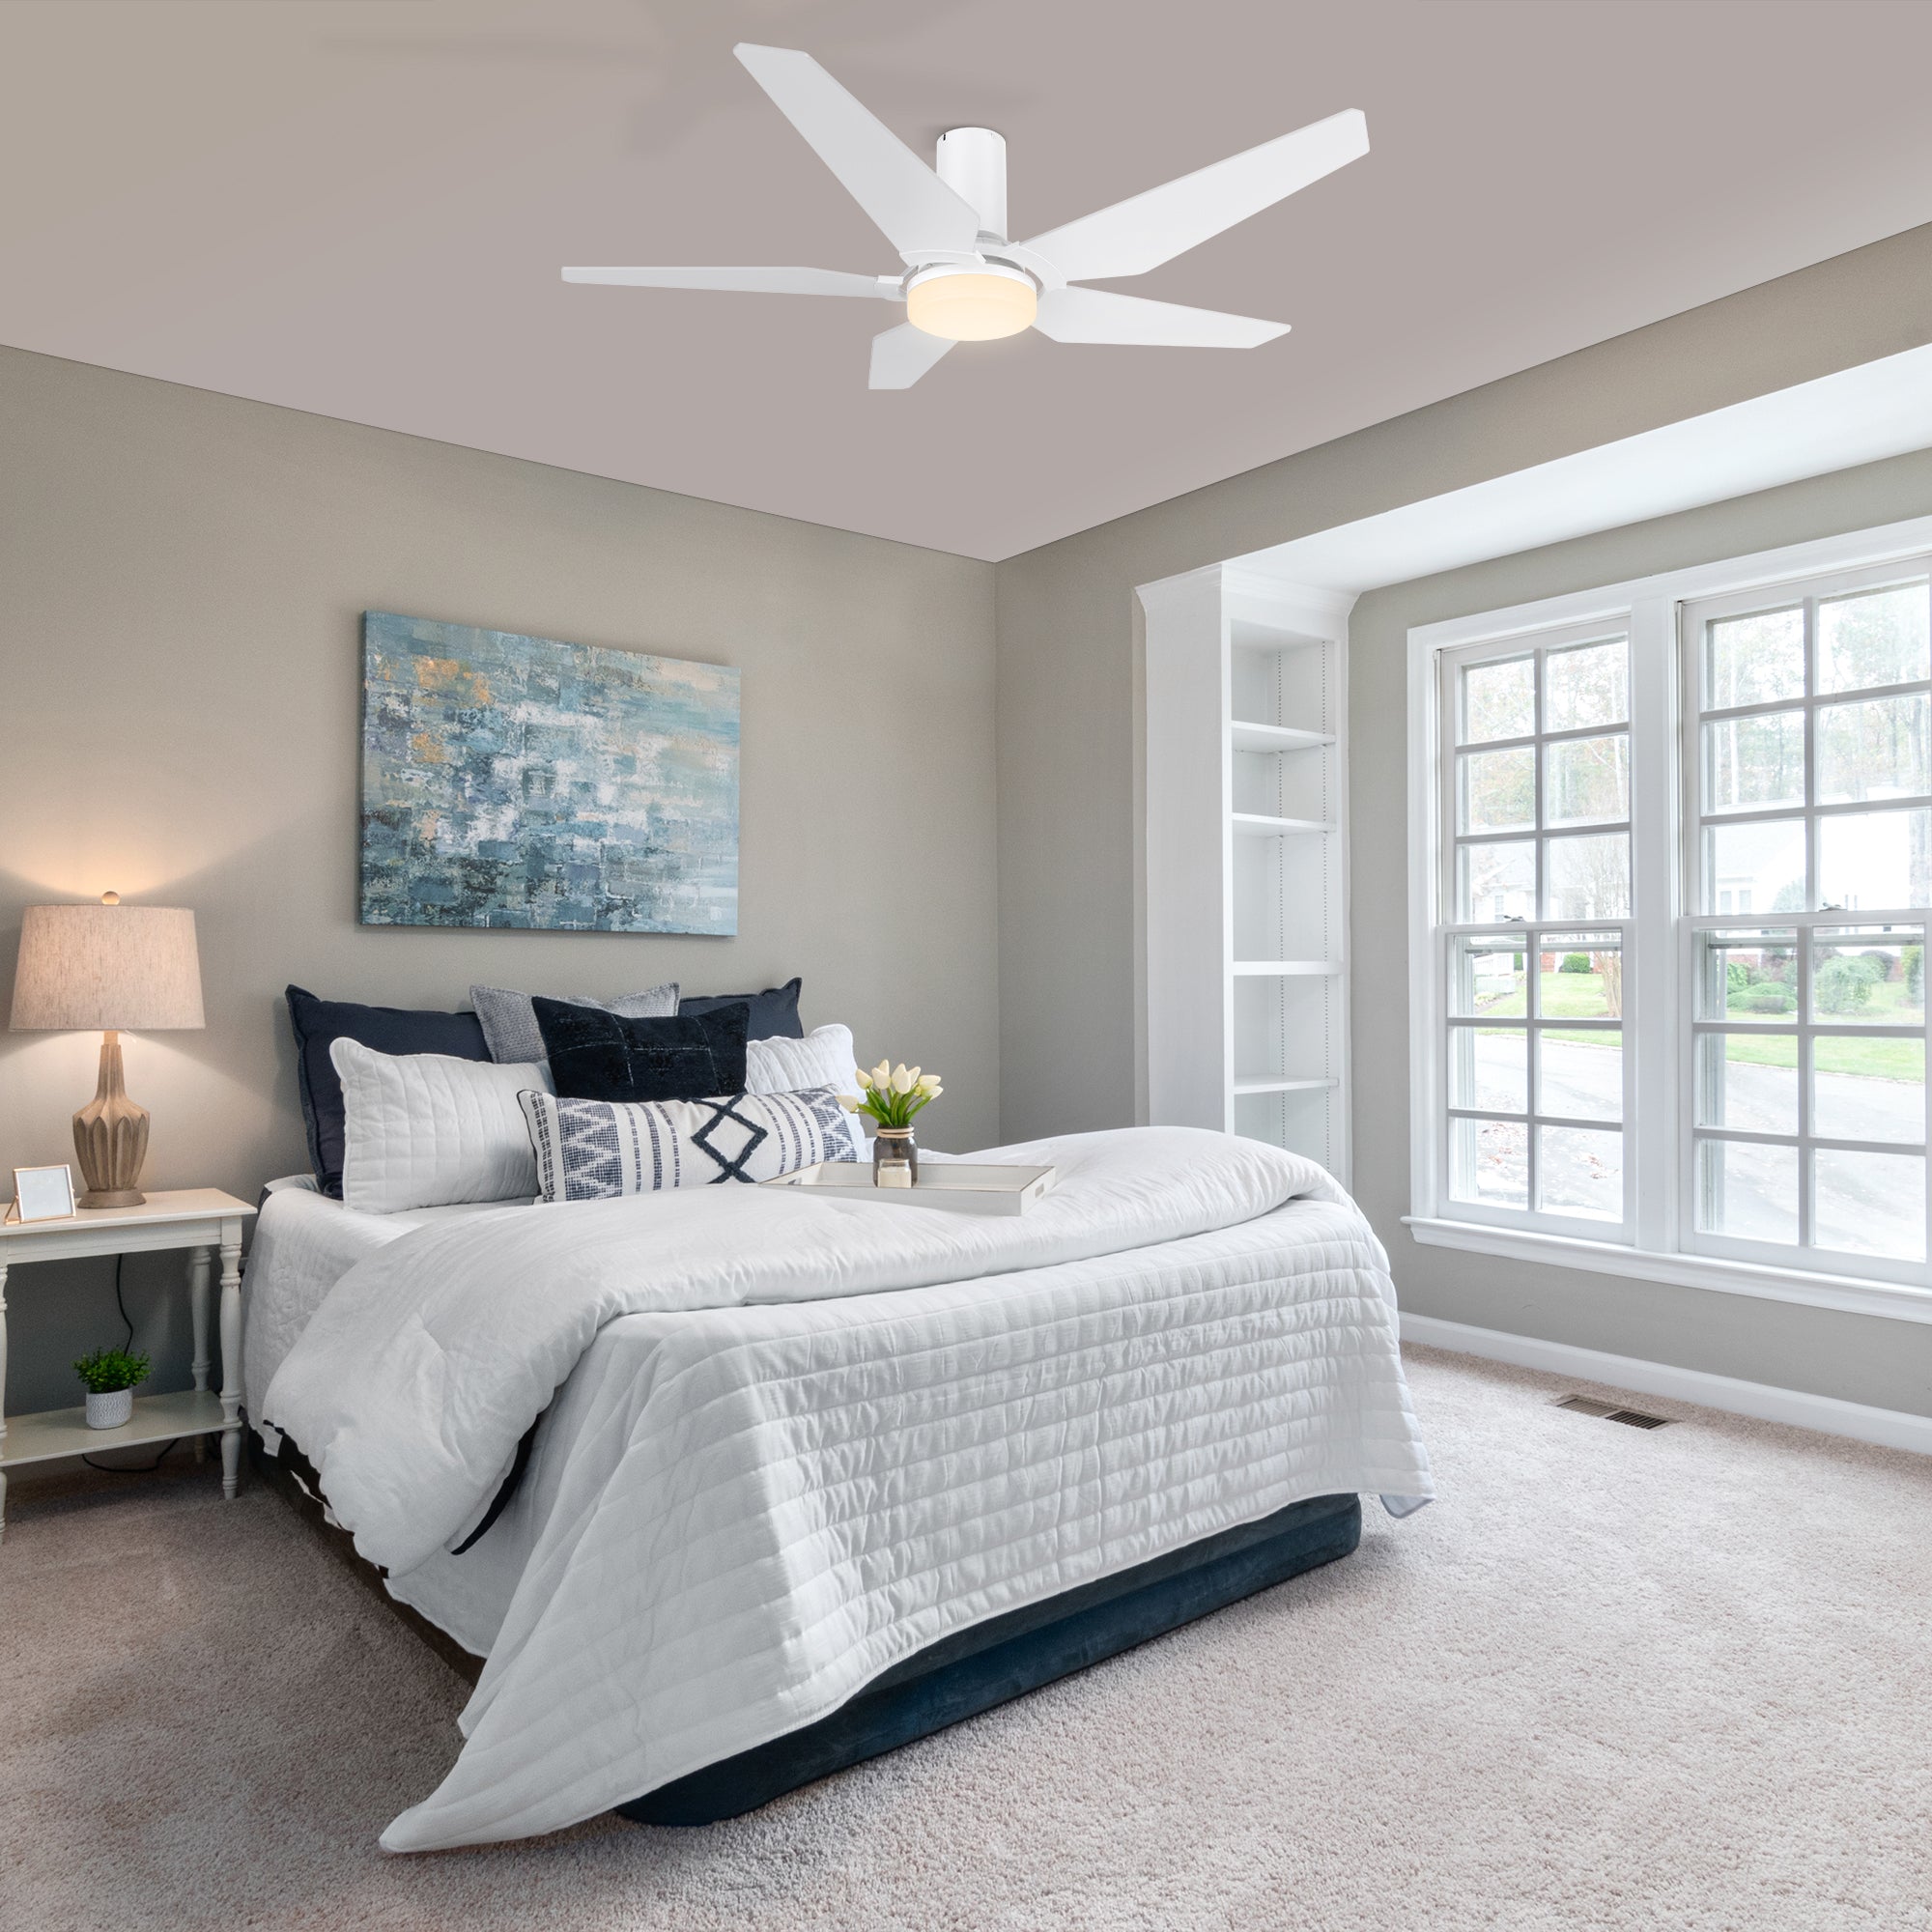 The Maclean 48" ceiling fan will keep your living space cool, bright, and stylish. This soft modern masterpiece is perfect for indoor living spaces.